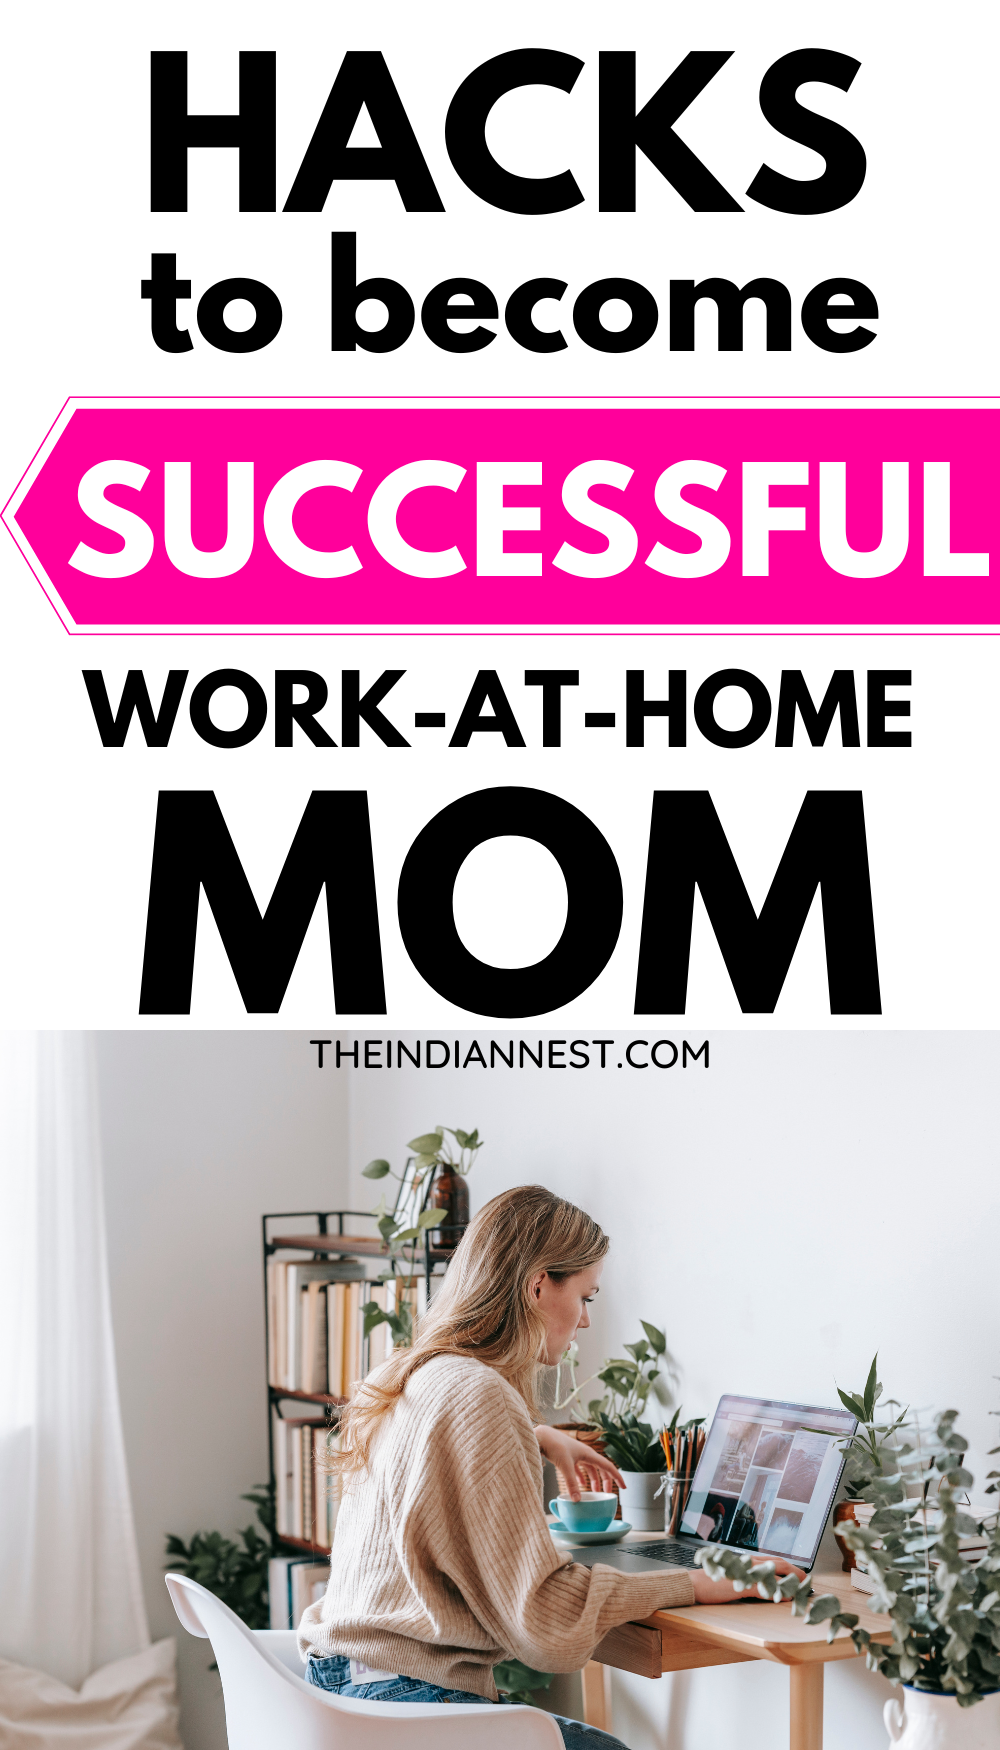 How to become a successful work-at-home mom